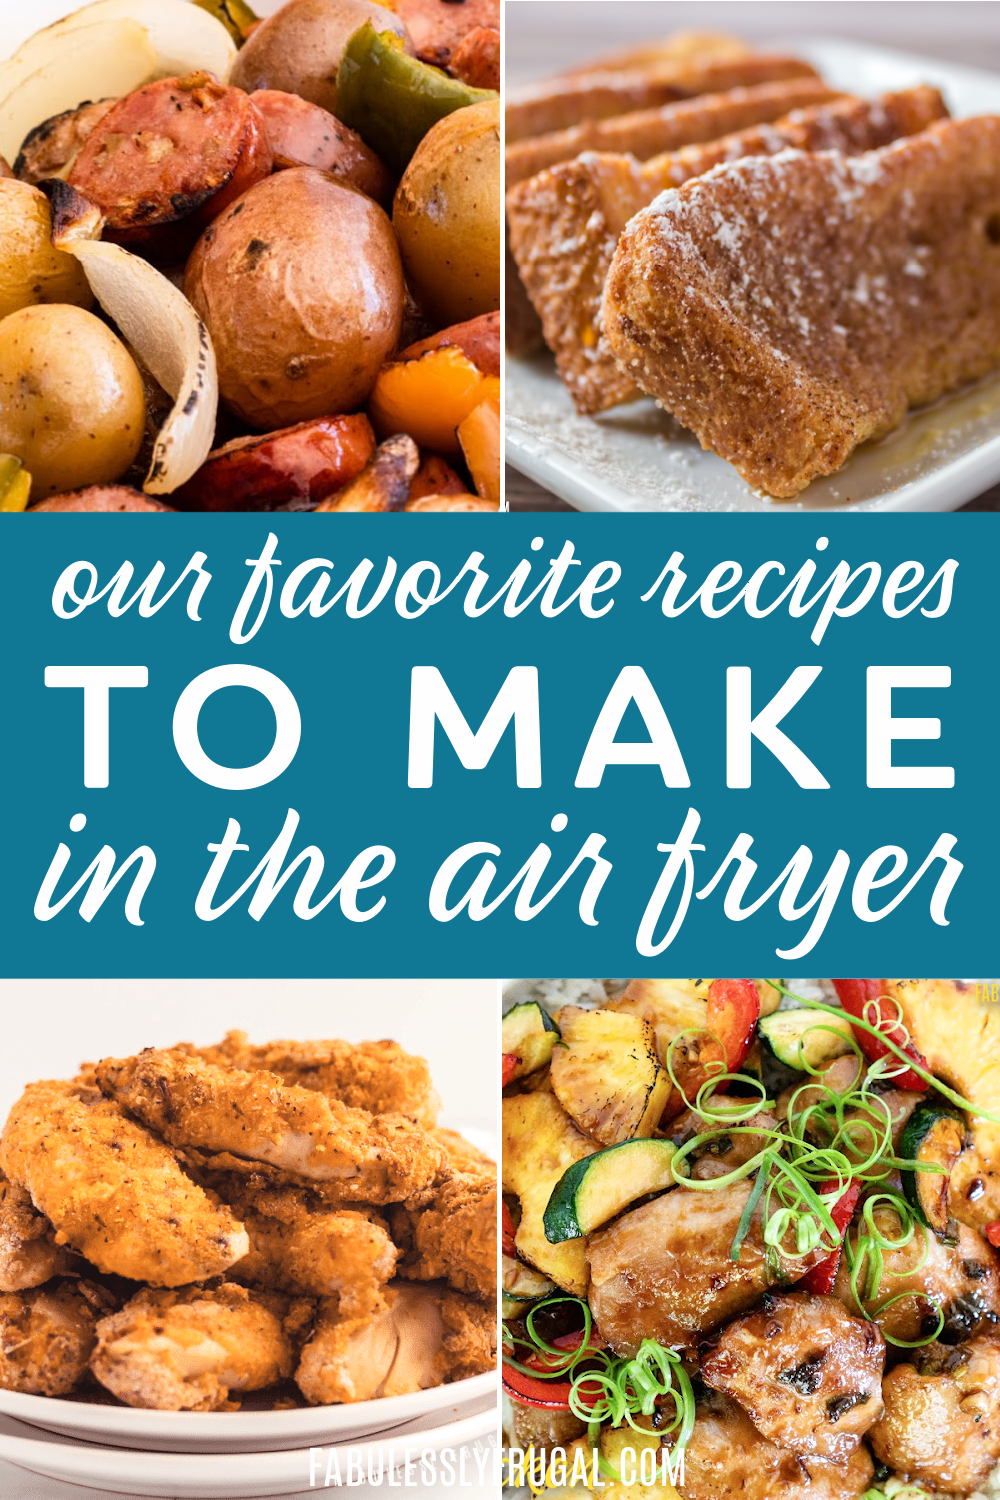 https://fabulesslyfrugal.com/wp-content/uploads/2022/12/1_The-10-Best-Air-Fryer-Recipes-Ever-2.png